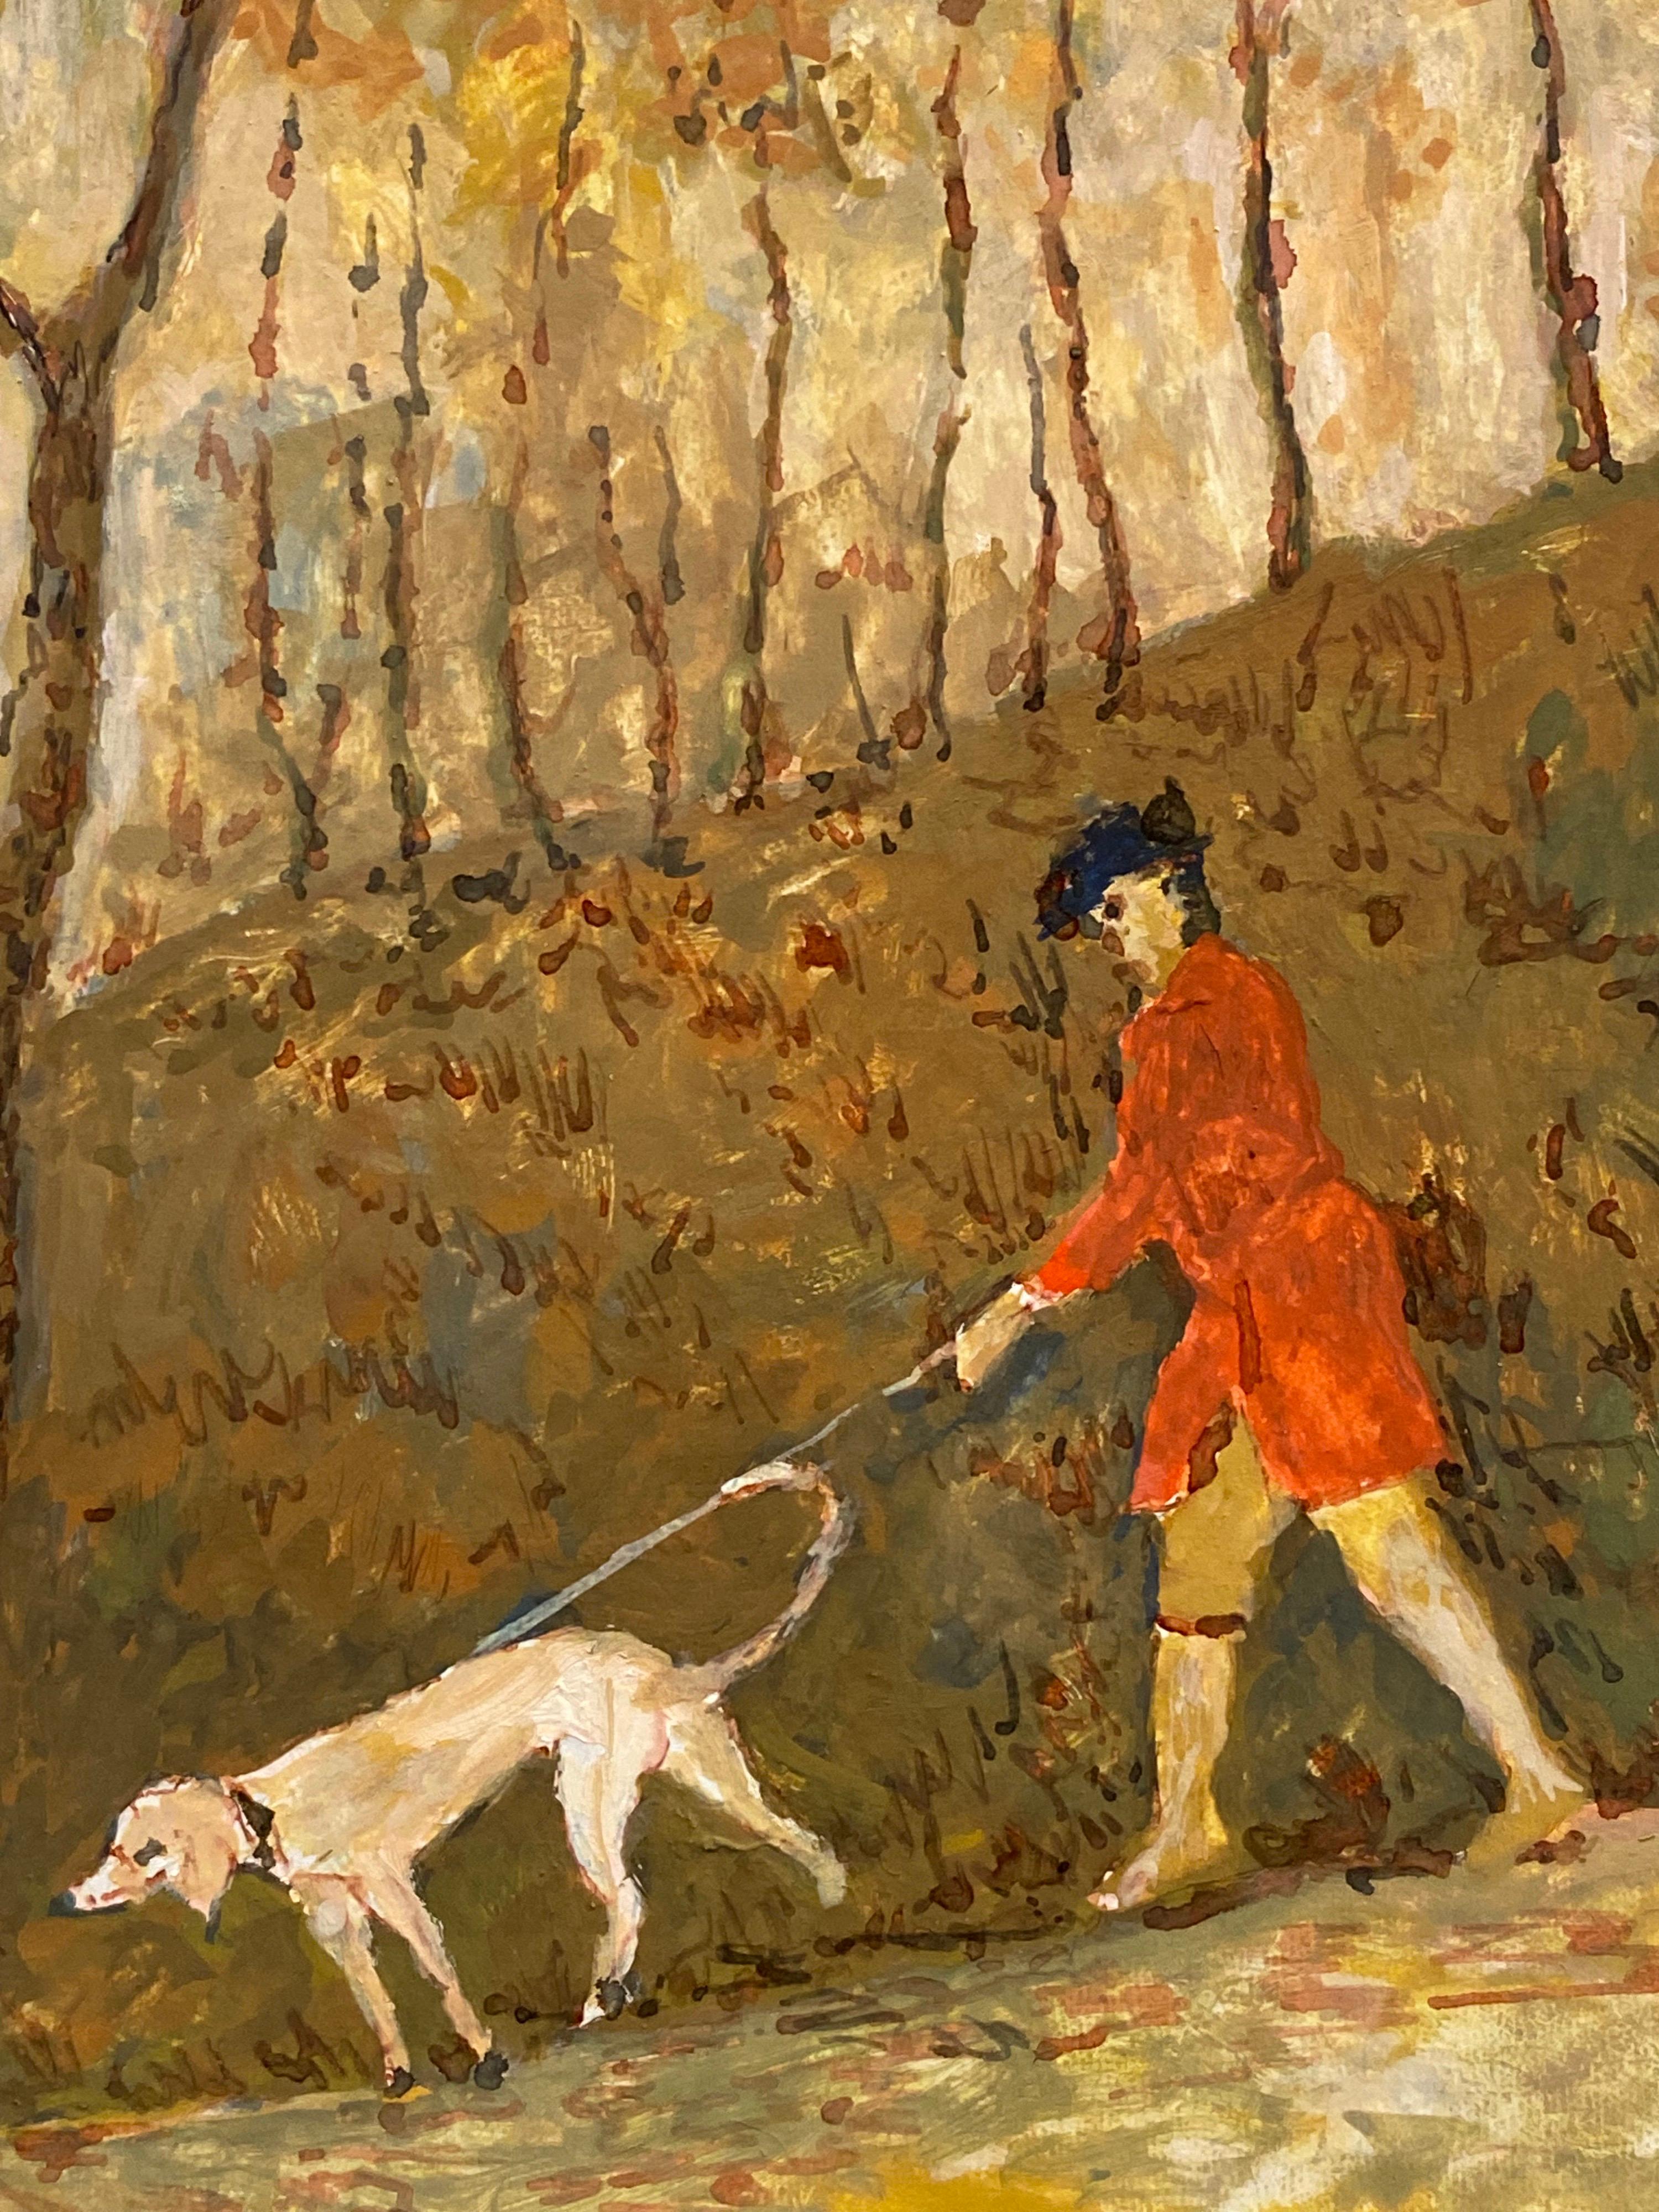 Huntsman and Hound
by Bernard Labbe (French mid 20th century)
signed original watercolour/ gouache painting on board, unframed
size: 10 x 8.25 inches
condition: very good and ready to be enjoyed. 

provenance: the artists atelier/ studio, France